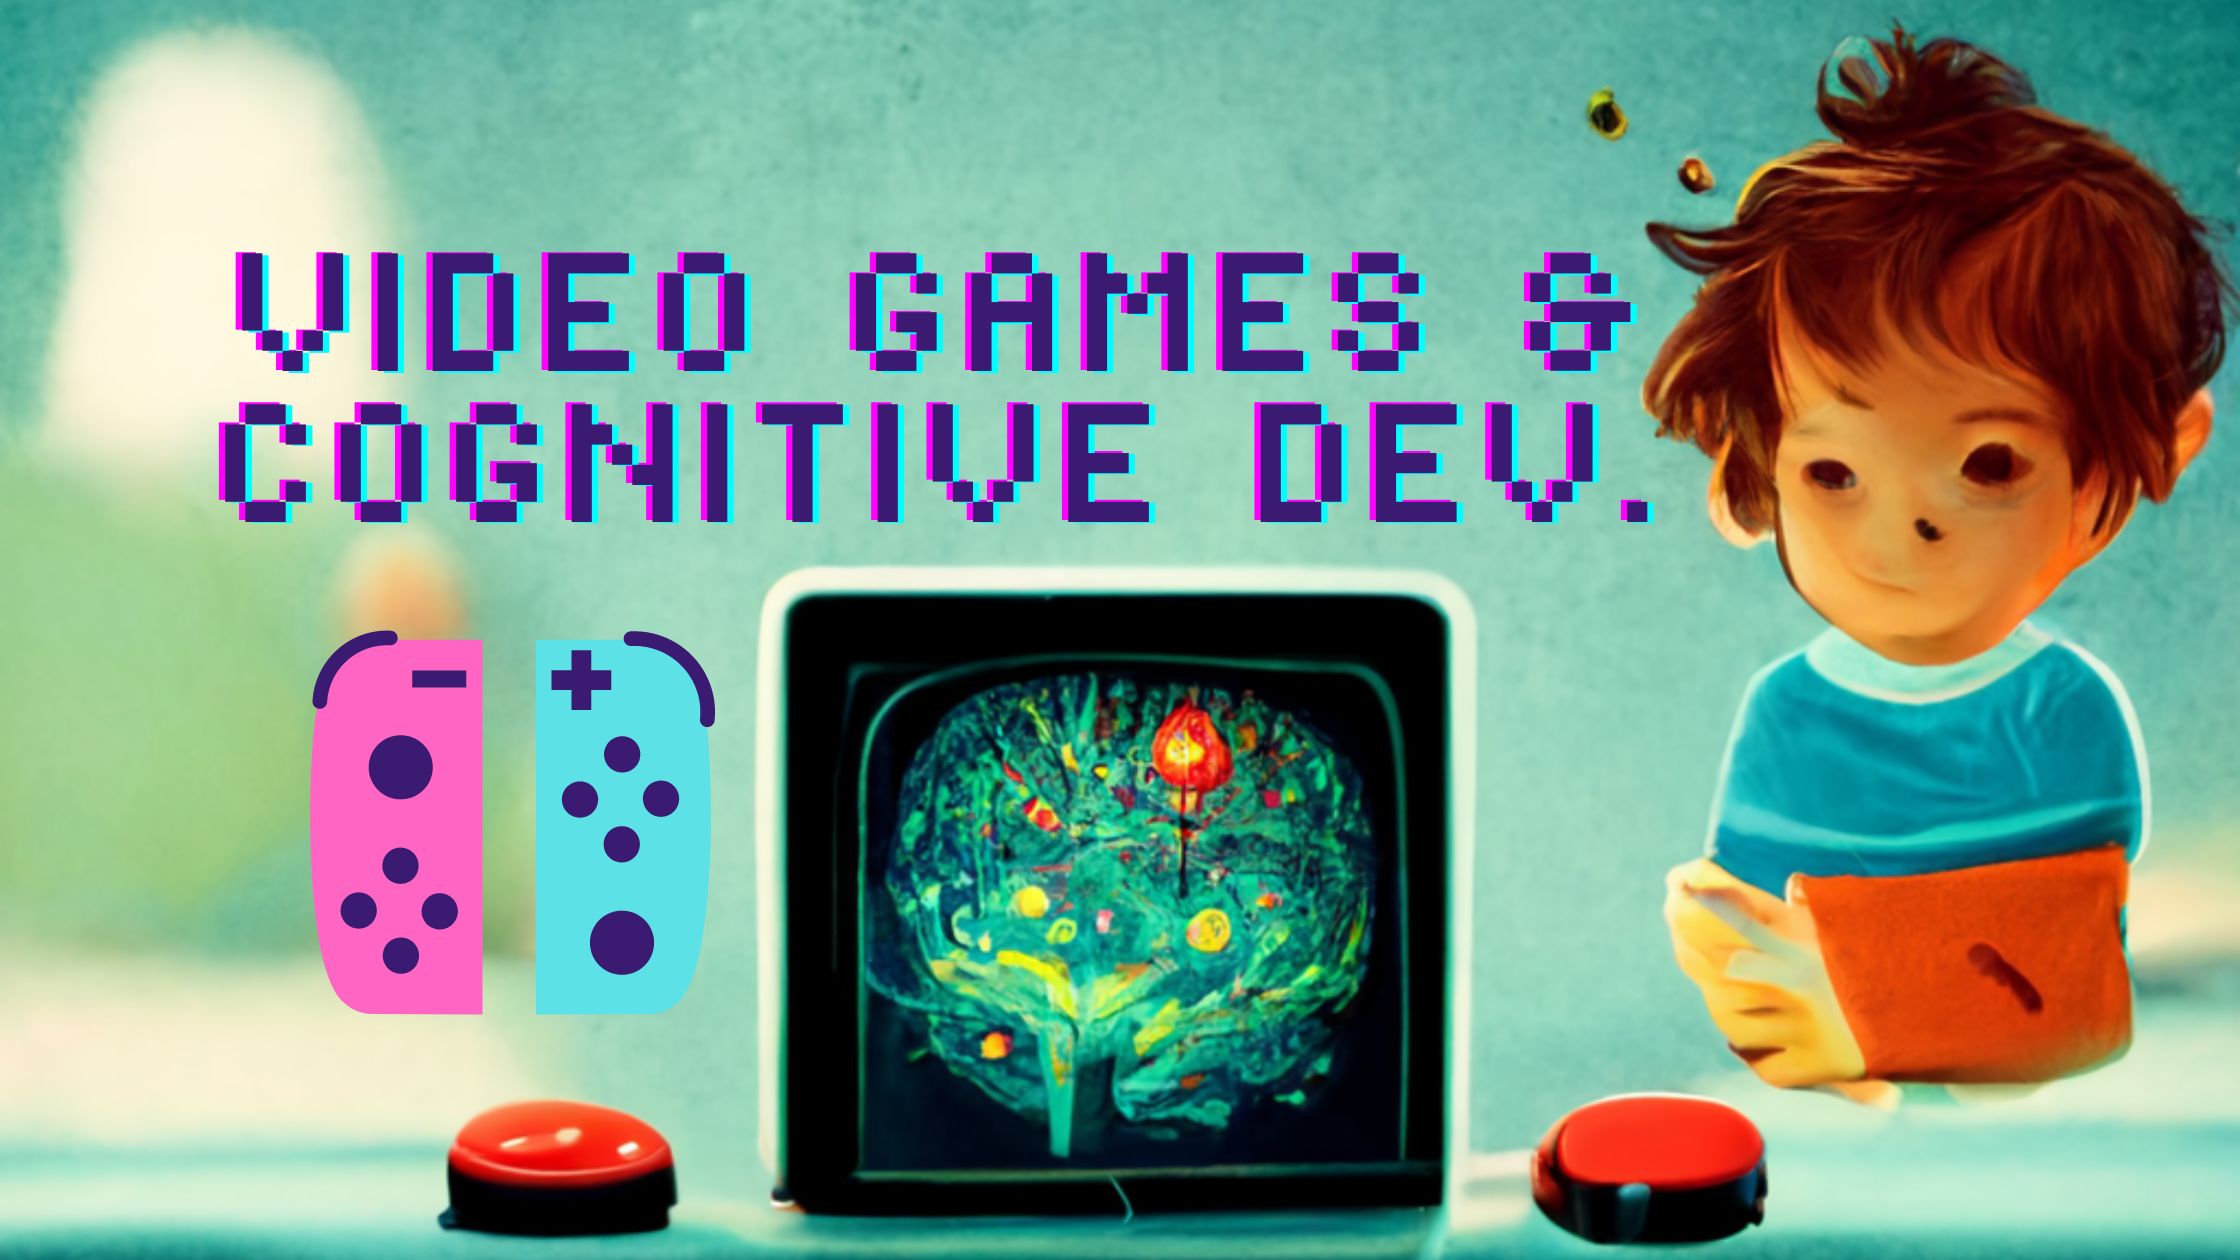 Video Games for Cognitive Development